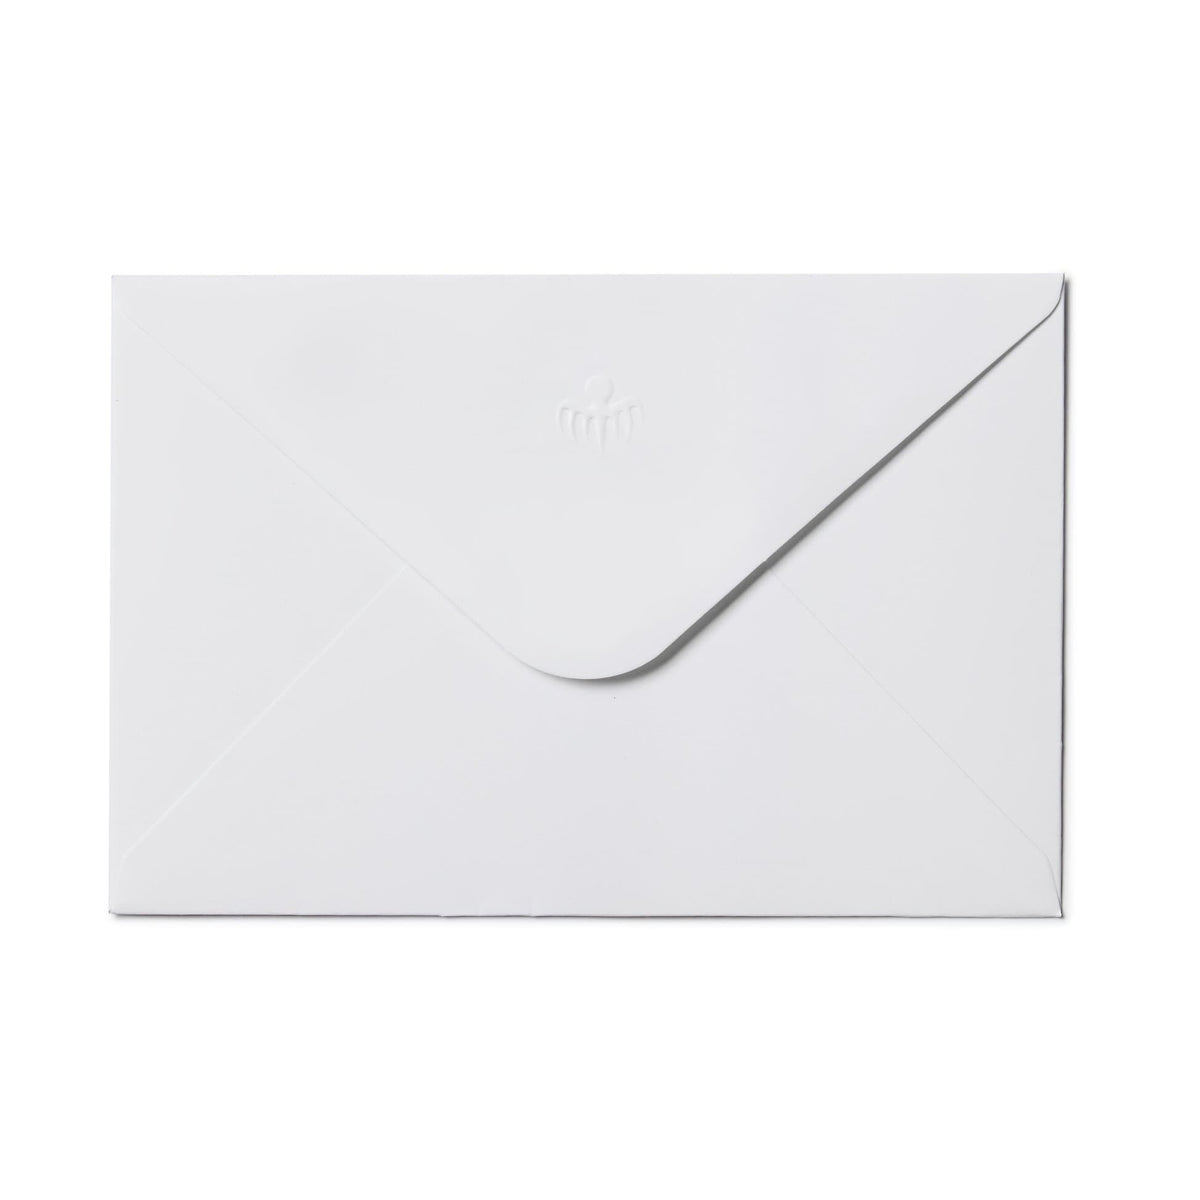 SPECTRE Symbol Notecard Set - No Time To Die Edition STATIONERY EML 